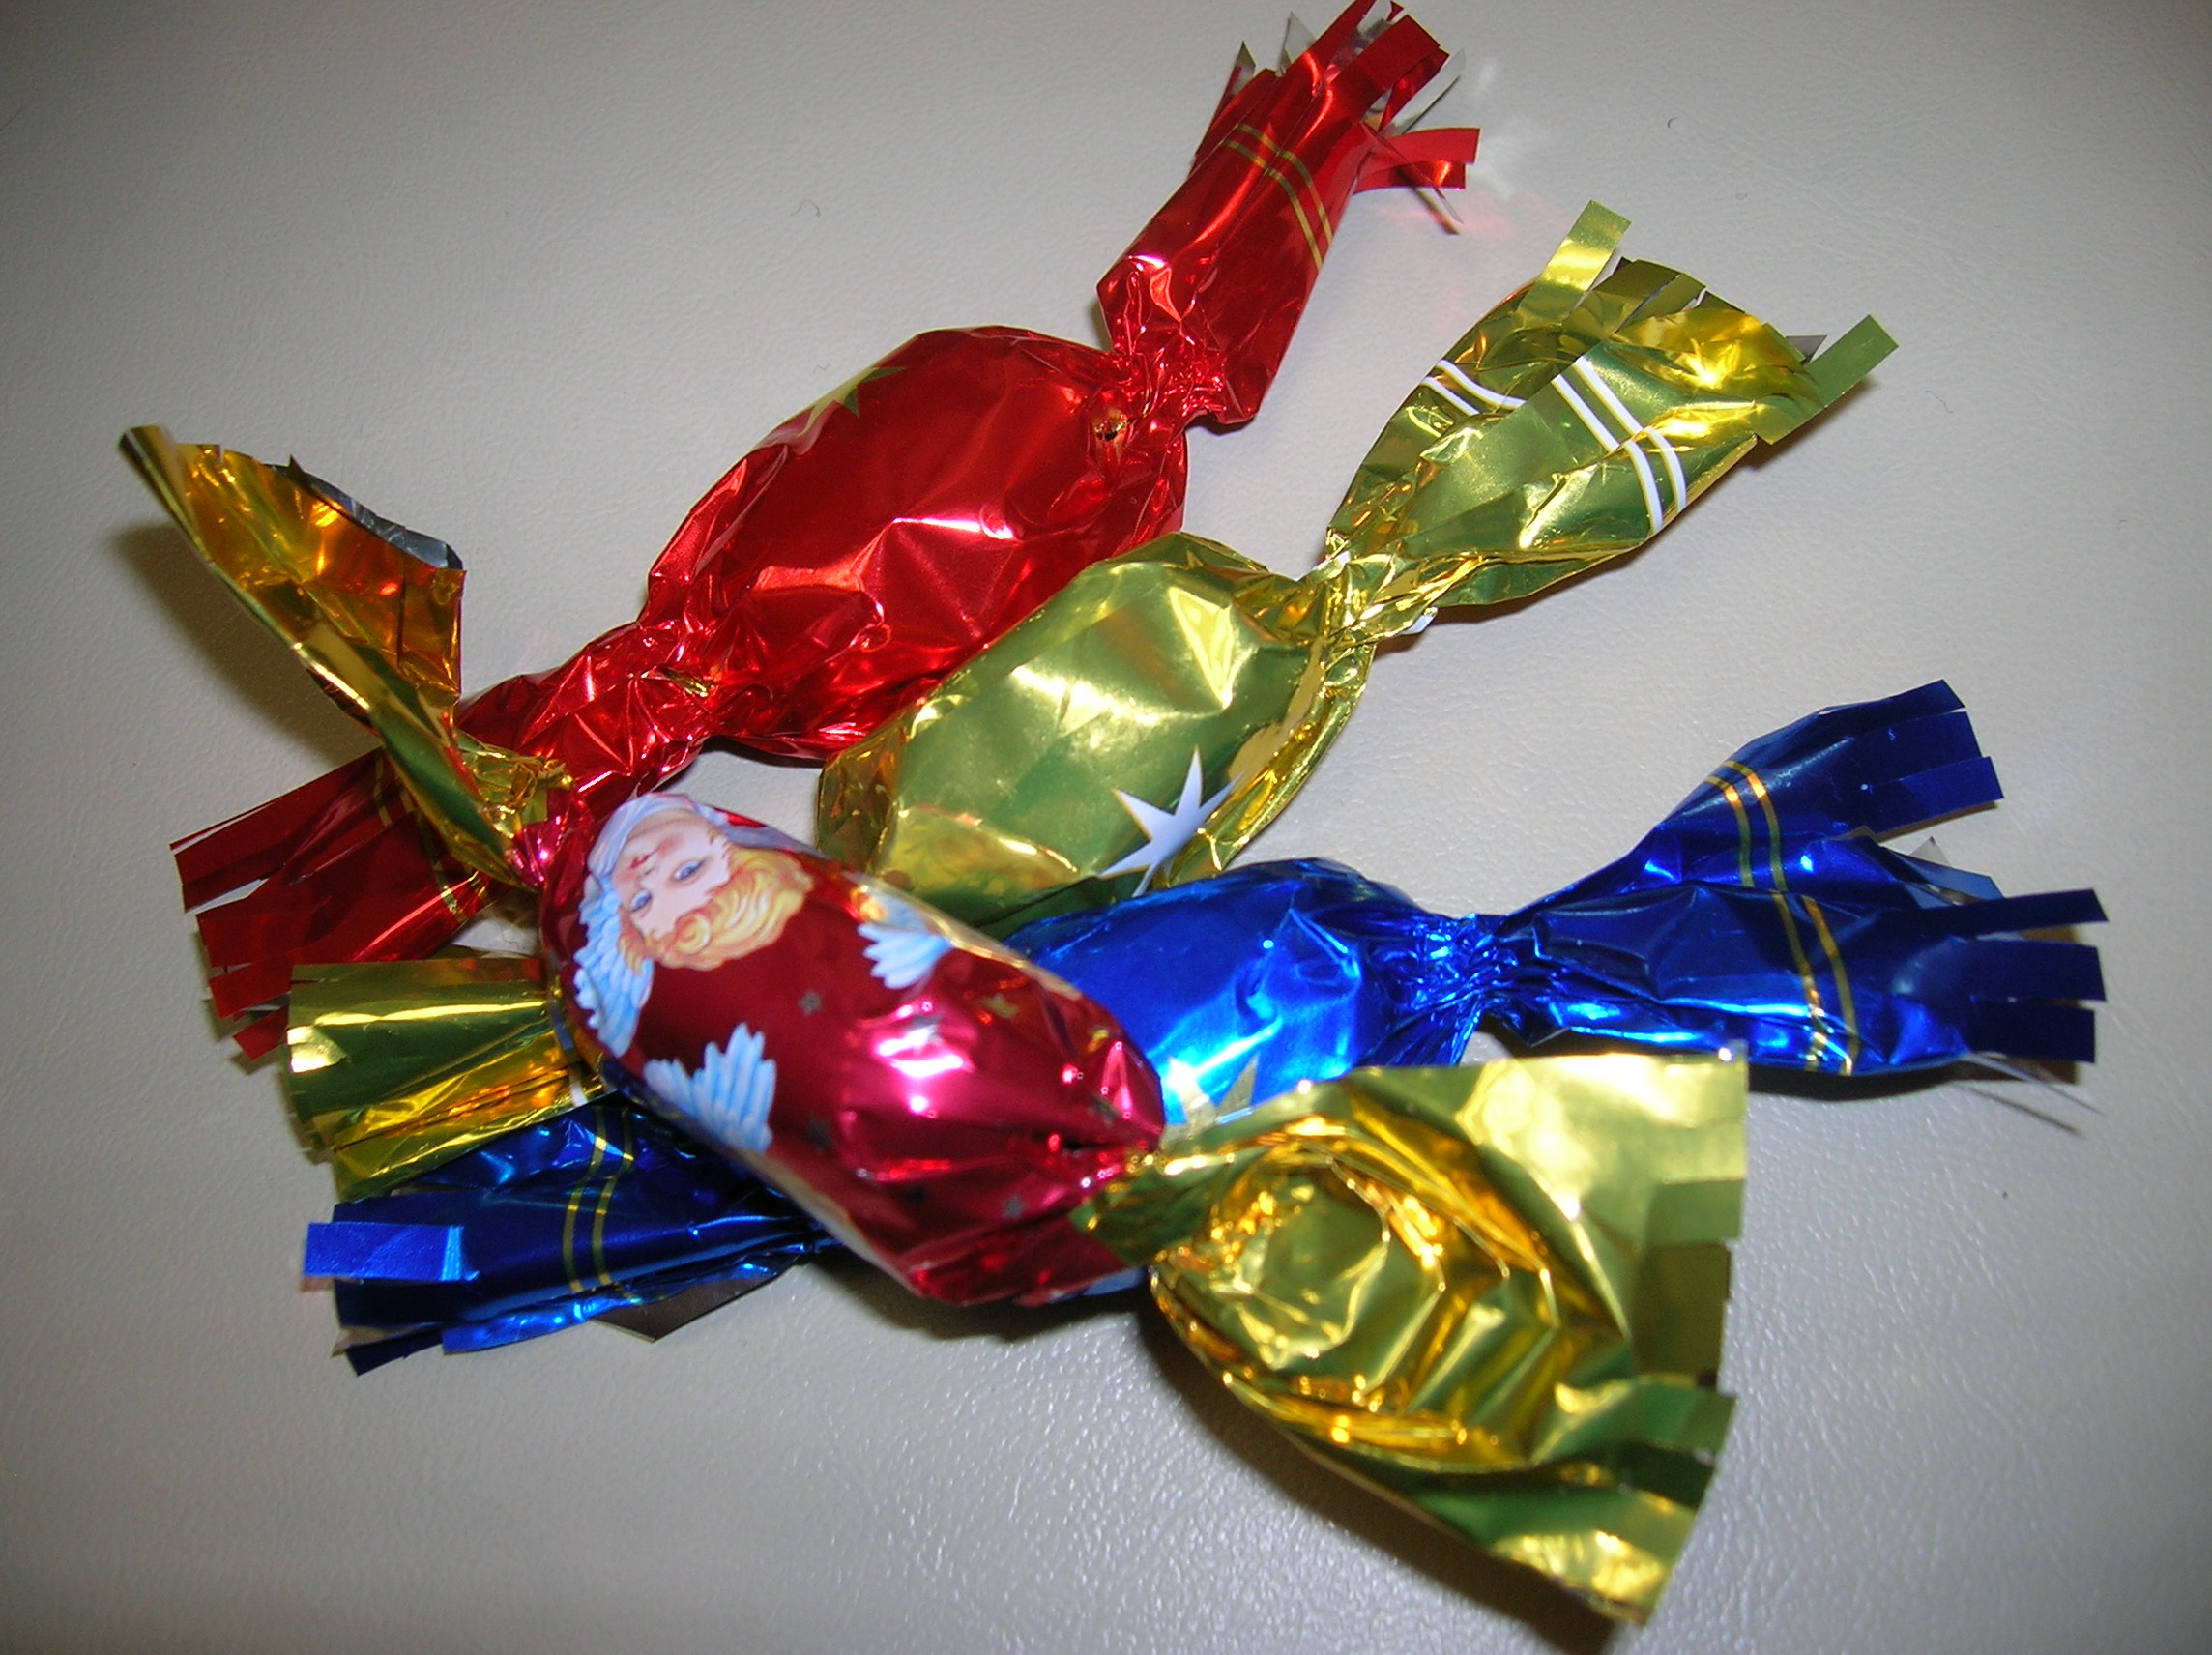 Christmas ‘Salon Candy’ Still A Hit With Hungarian Consumers